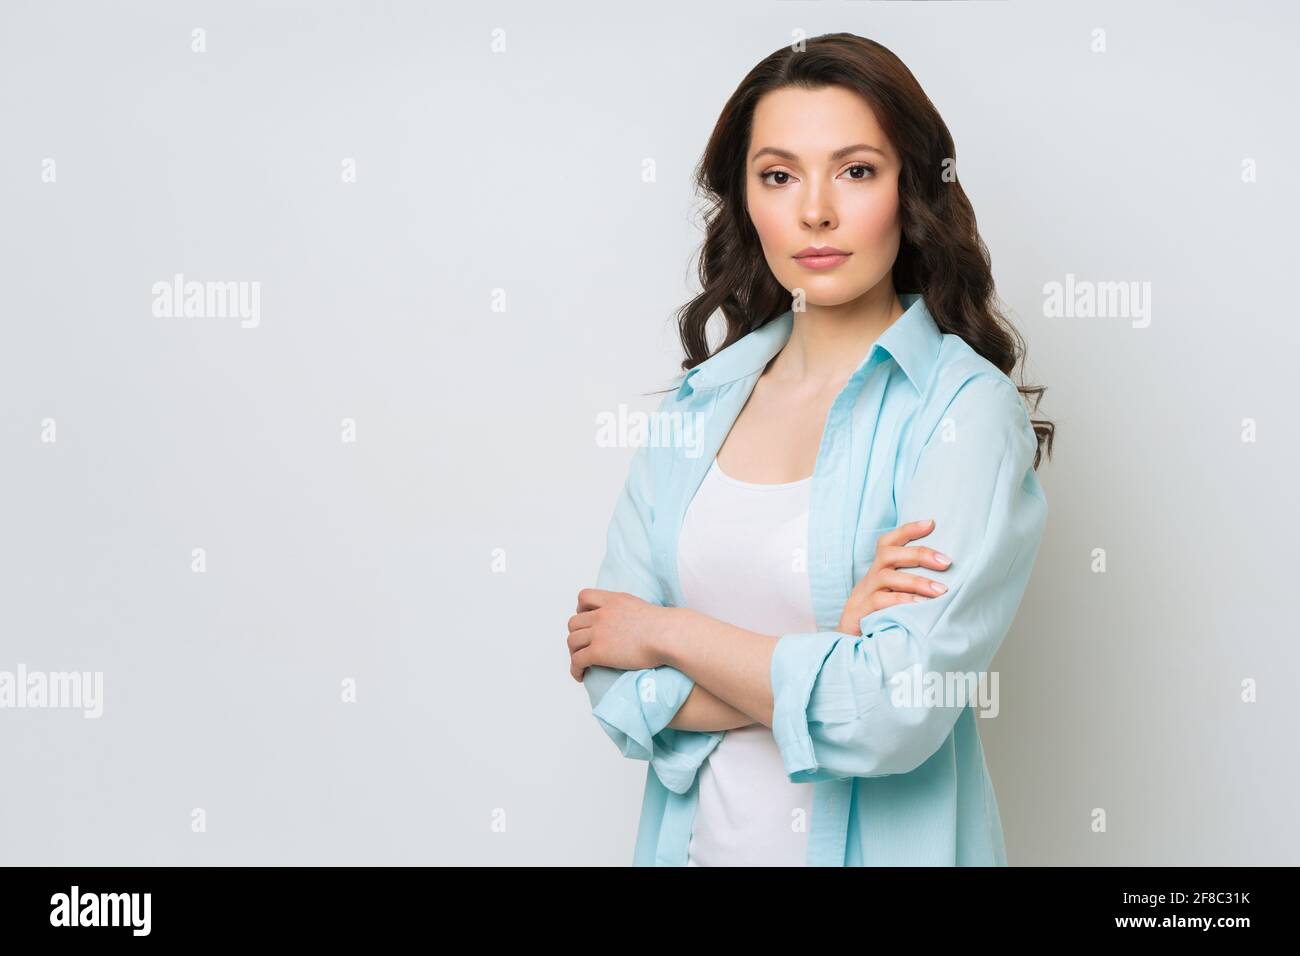 Young woman portrait. Adorable brunette in a sweater looking at the camera with her arms crossed. Stock Photo